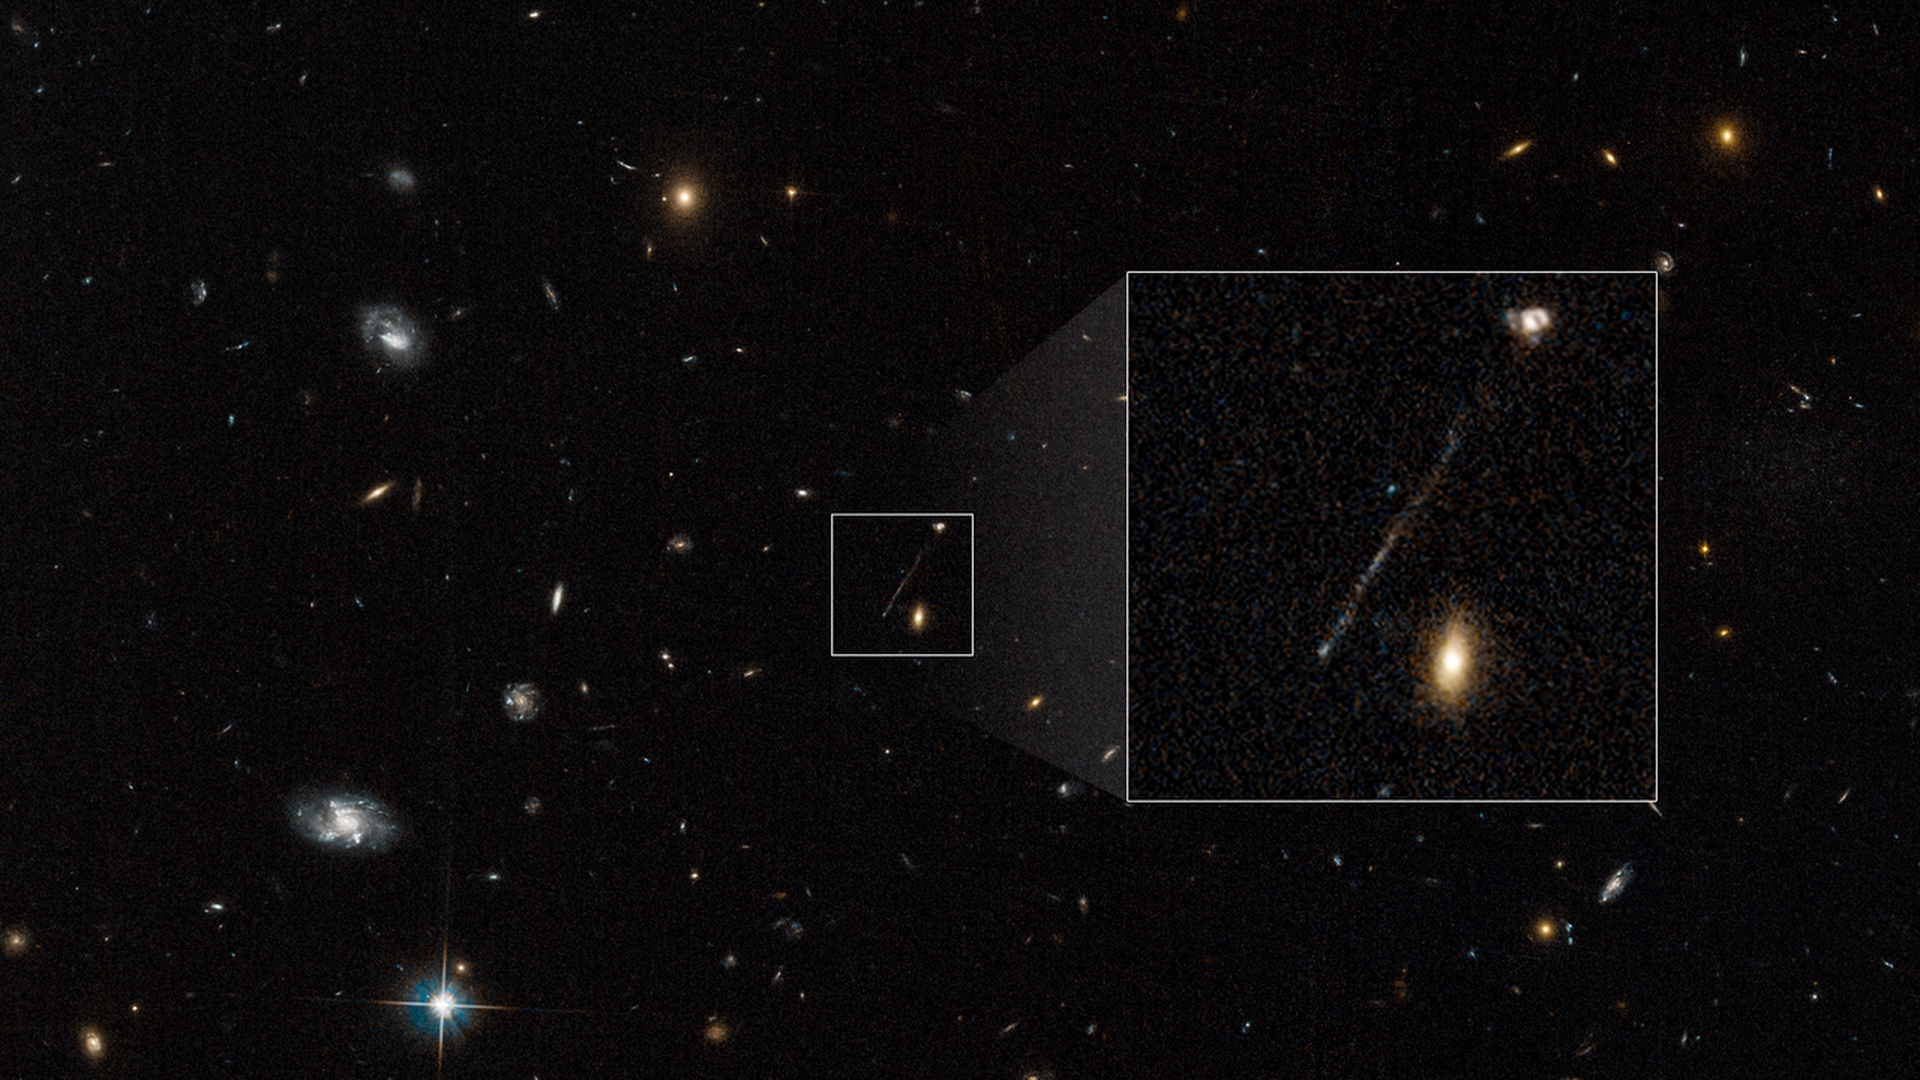 A runaway black hole with a line of stars behind it